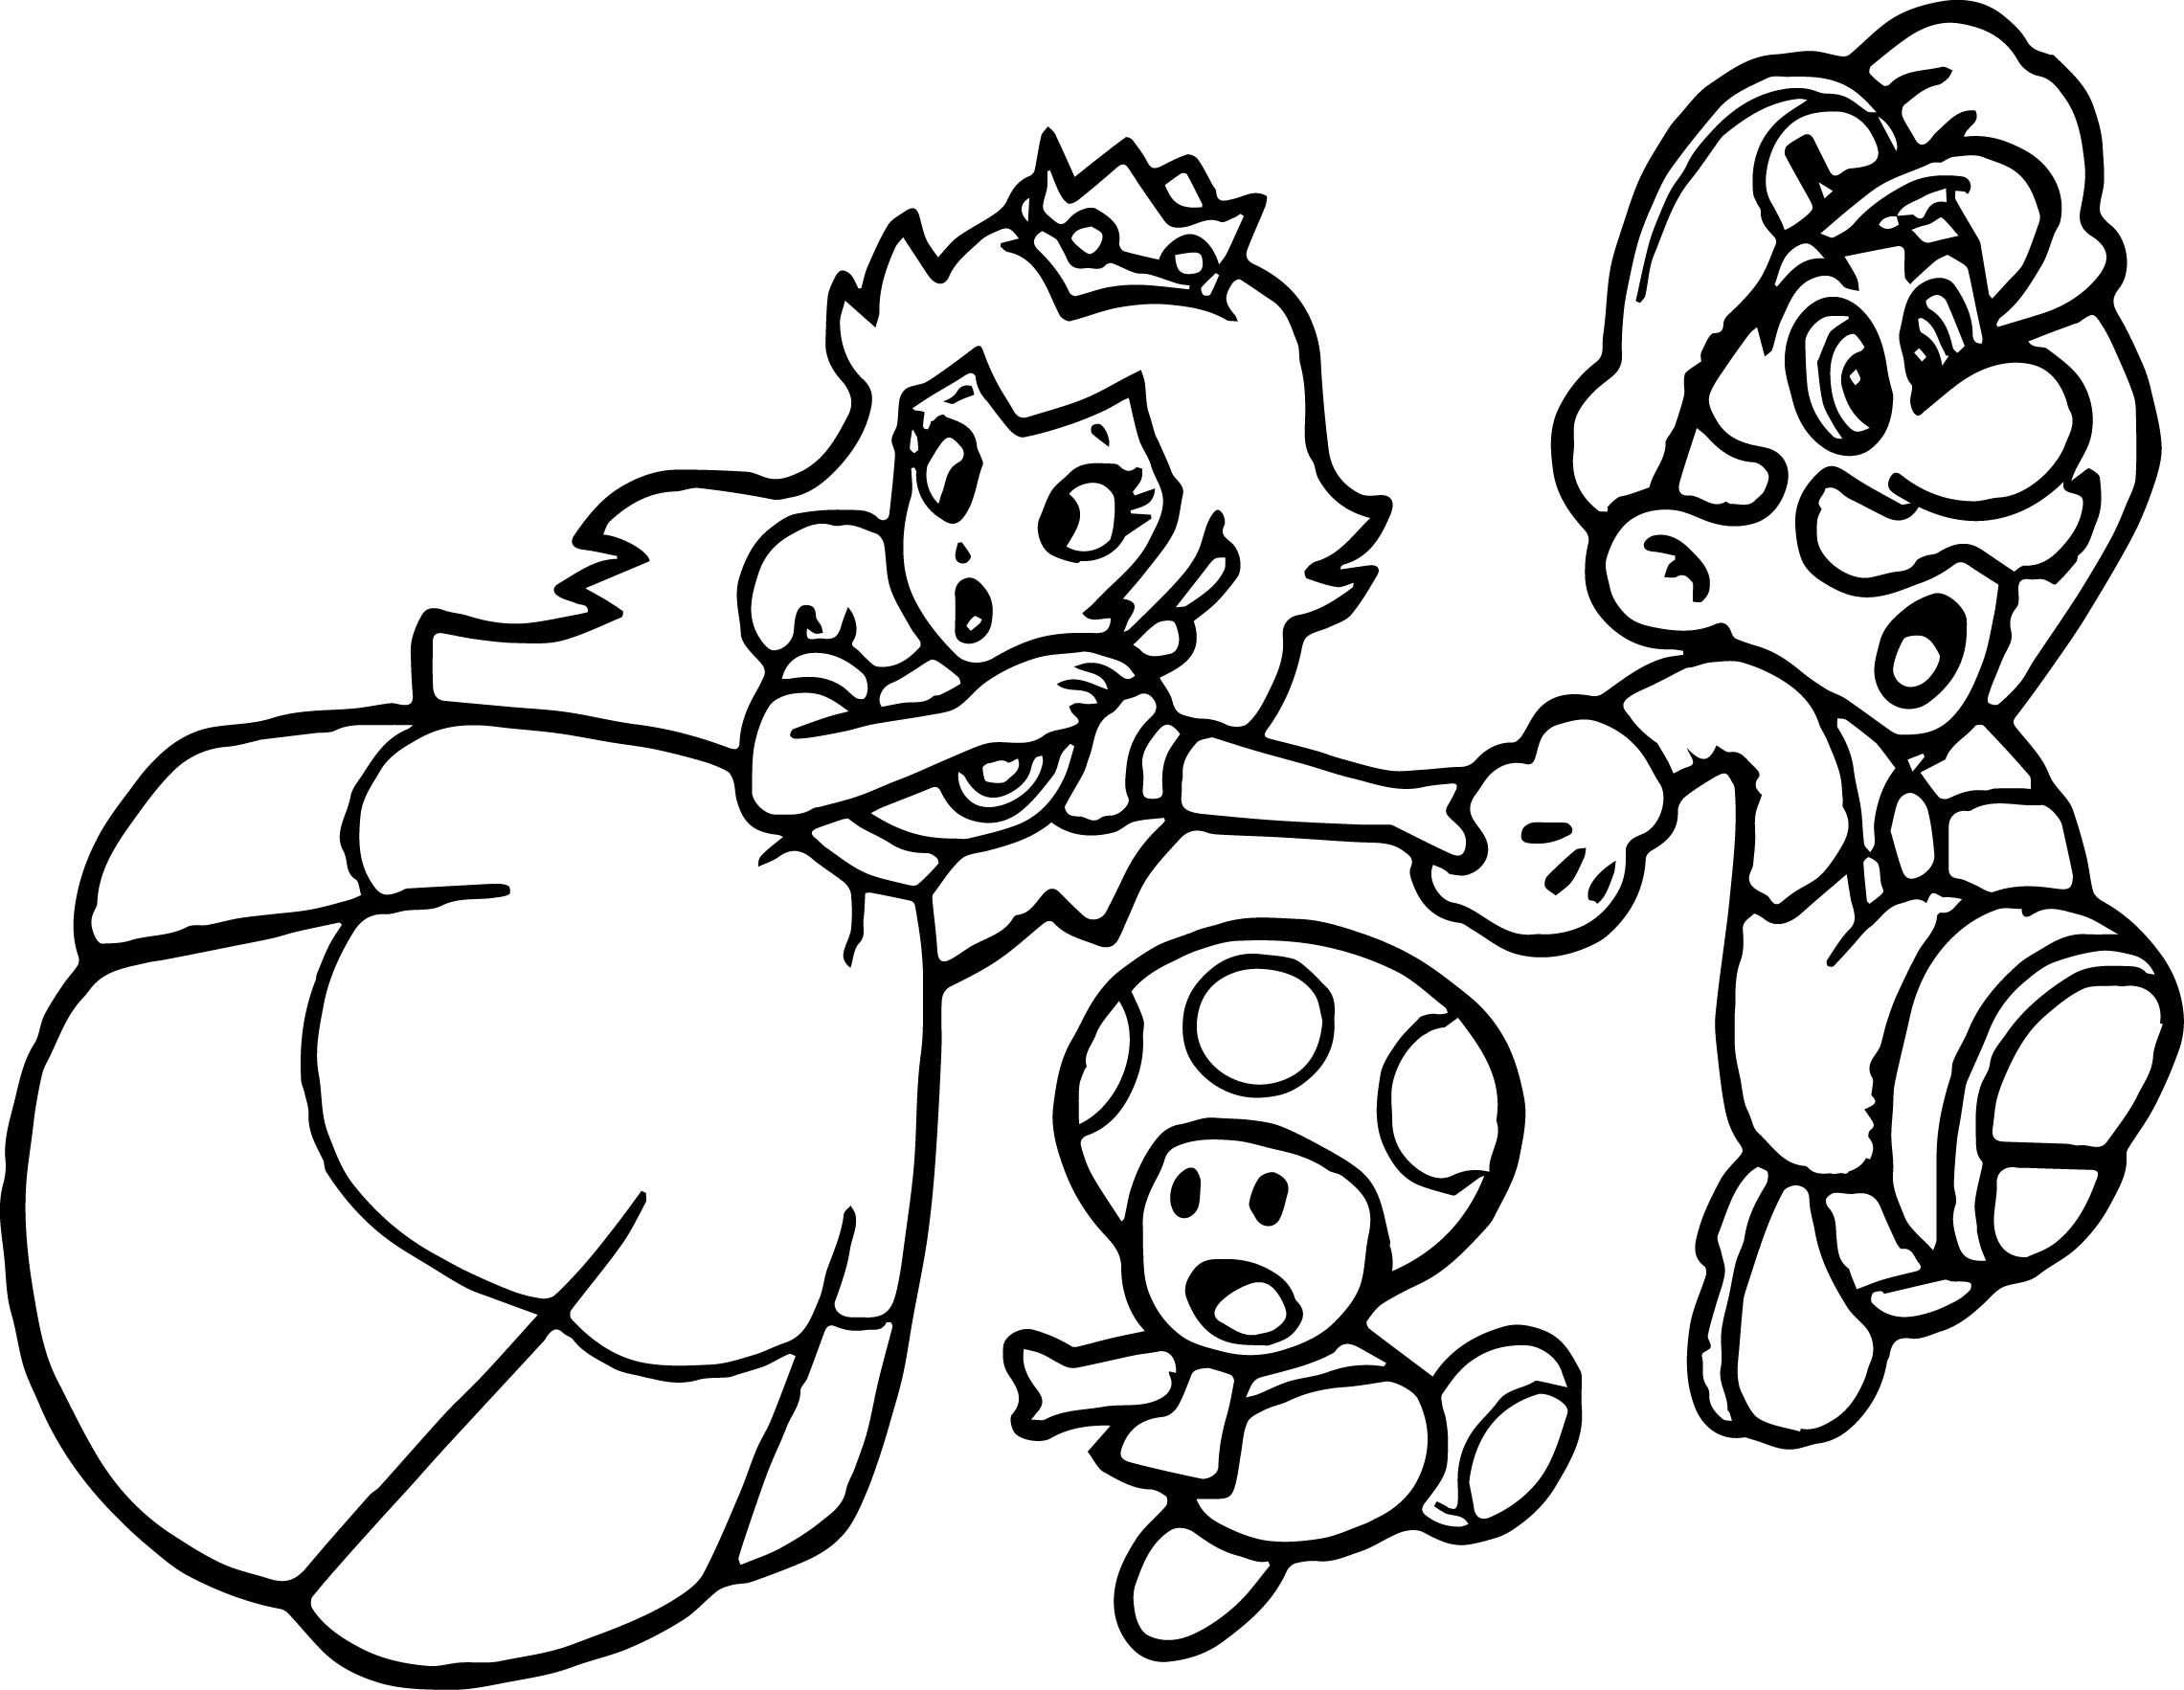 Super Mario Princess Mushroom Coloring Page With Images Super